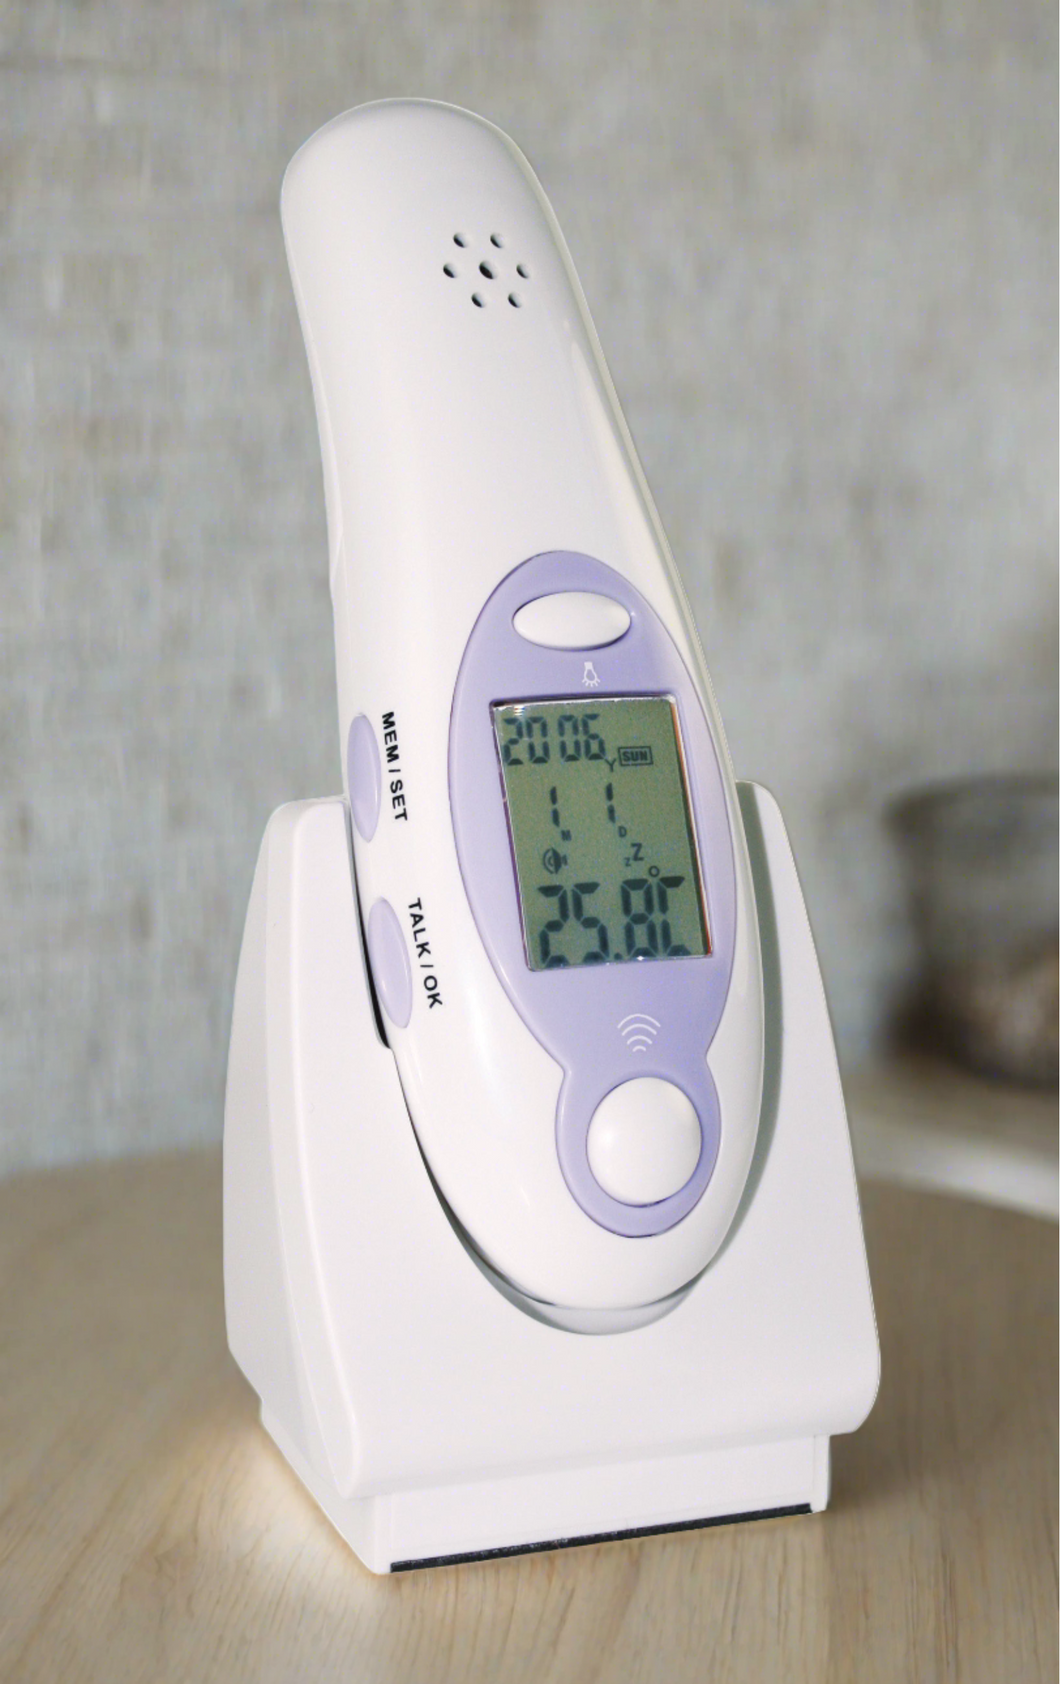 Talking thermometer. Clearance sale